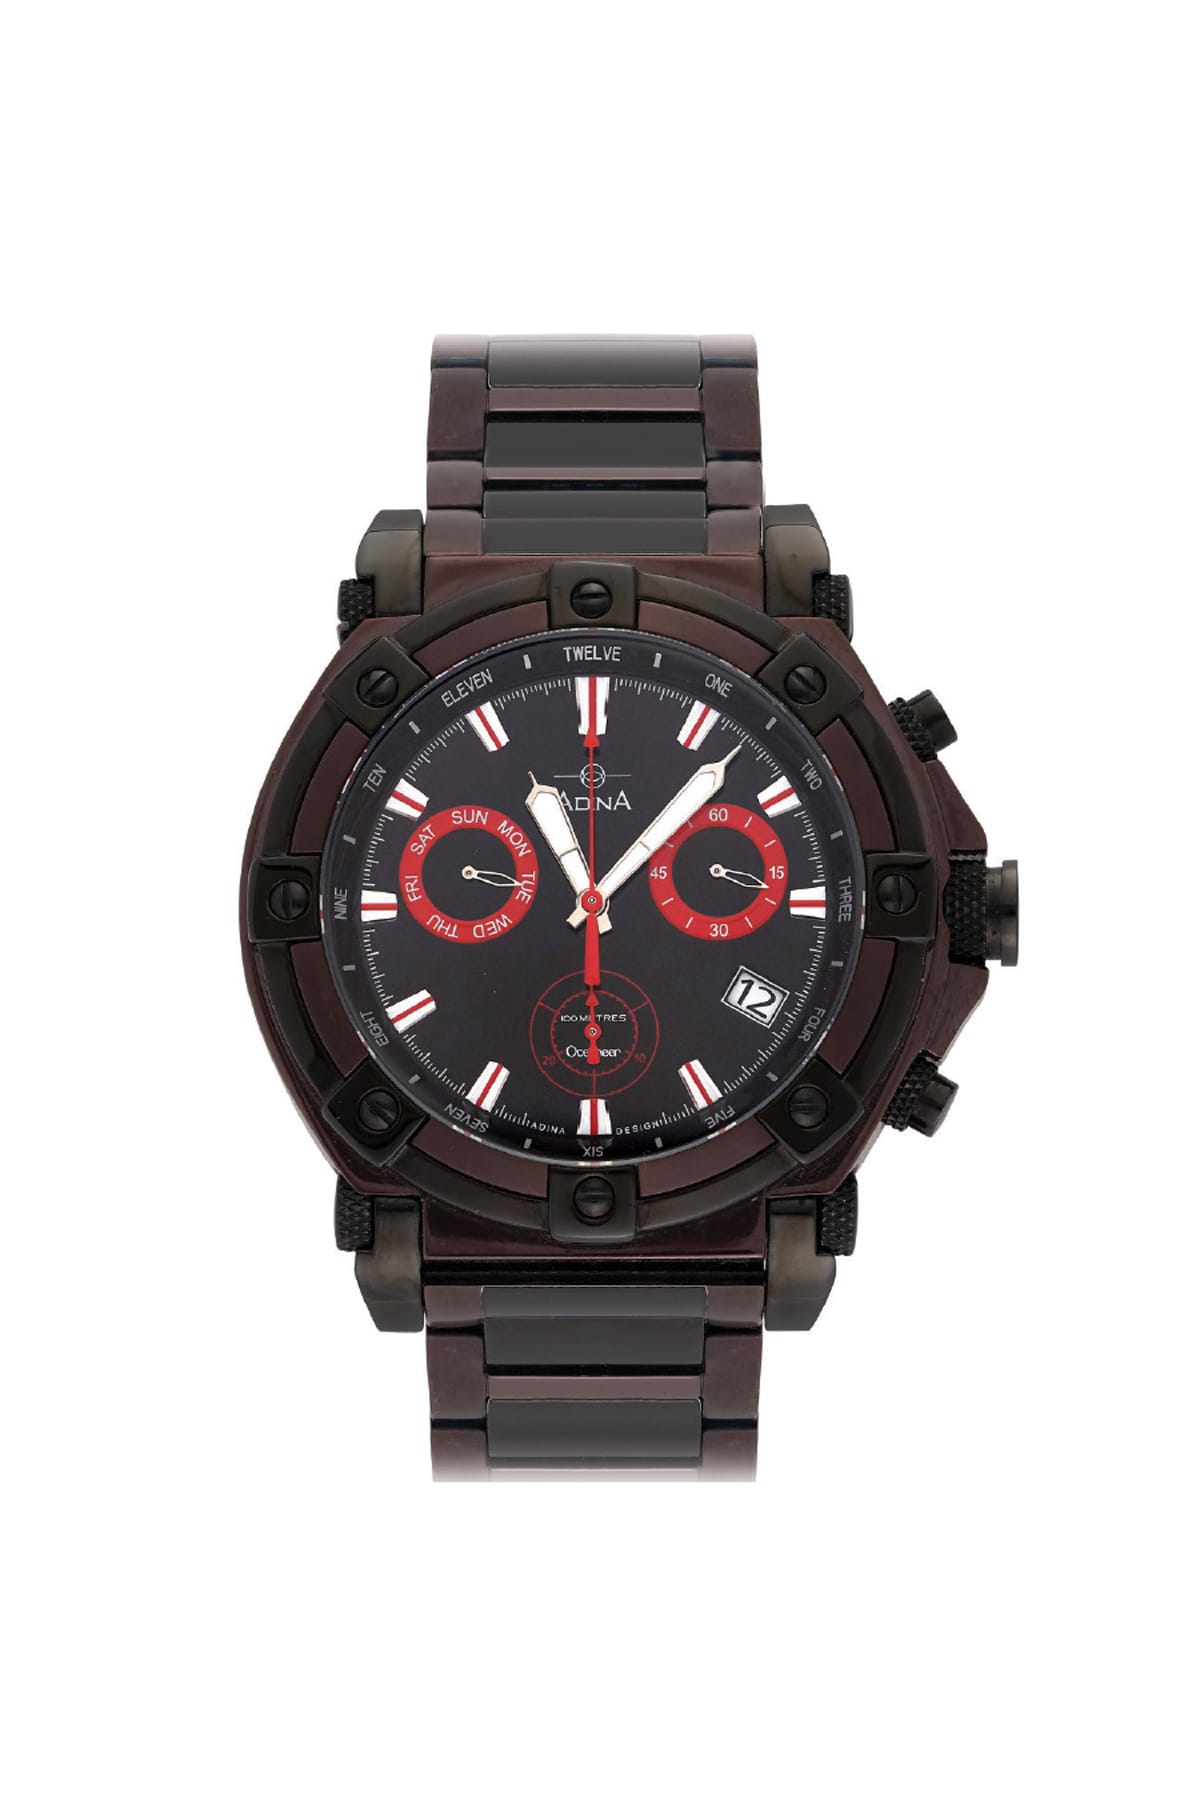 Adina Oceaneer Chronograph Sports Watch GW10 F2XB available from LeGassick.